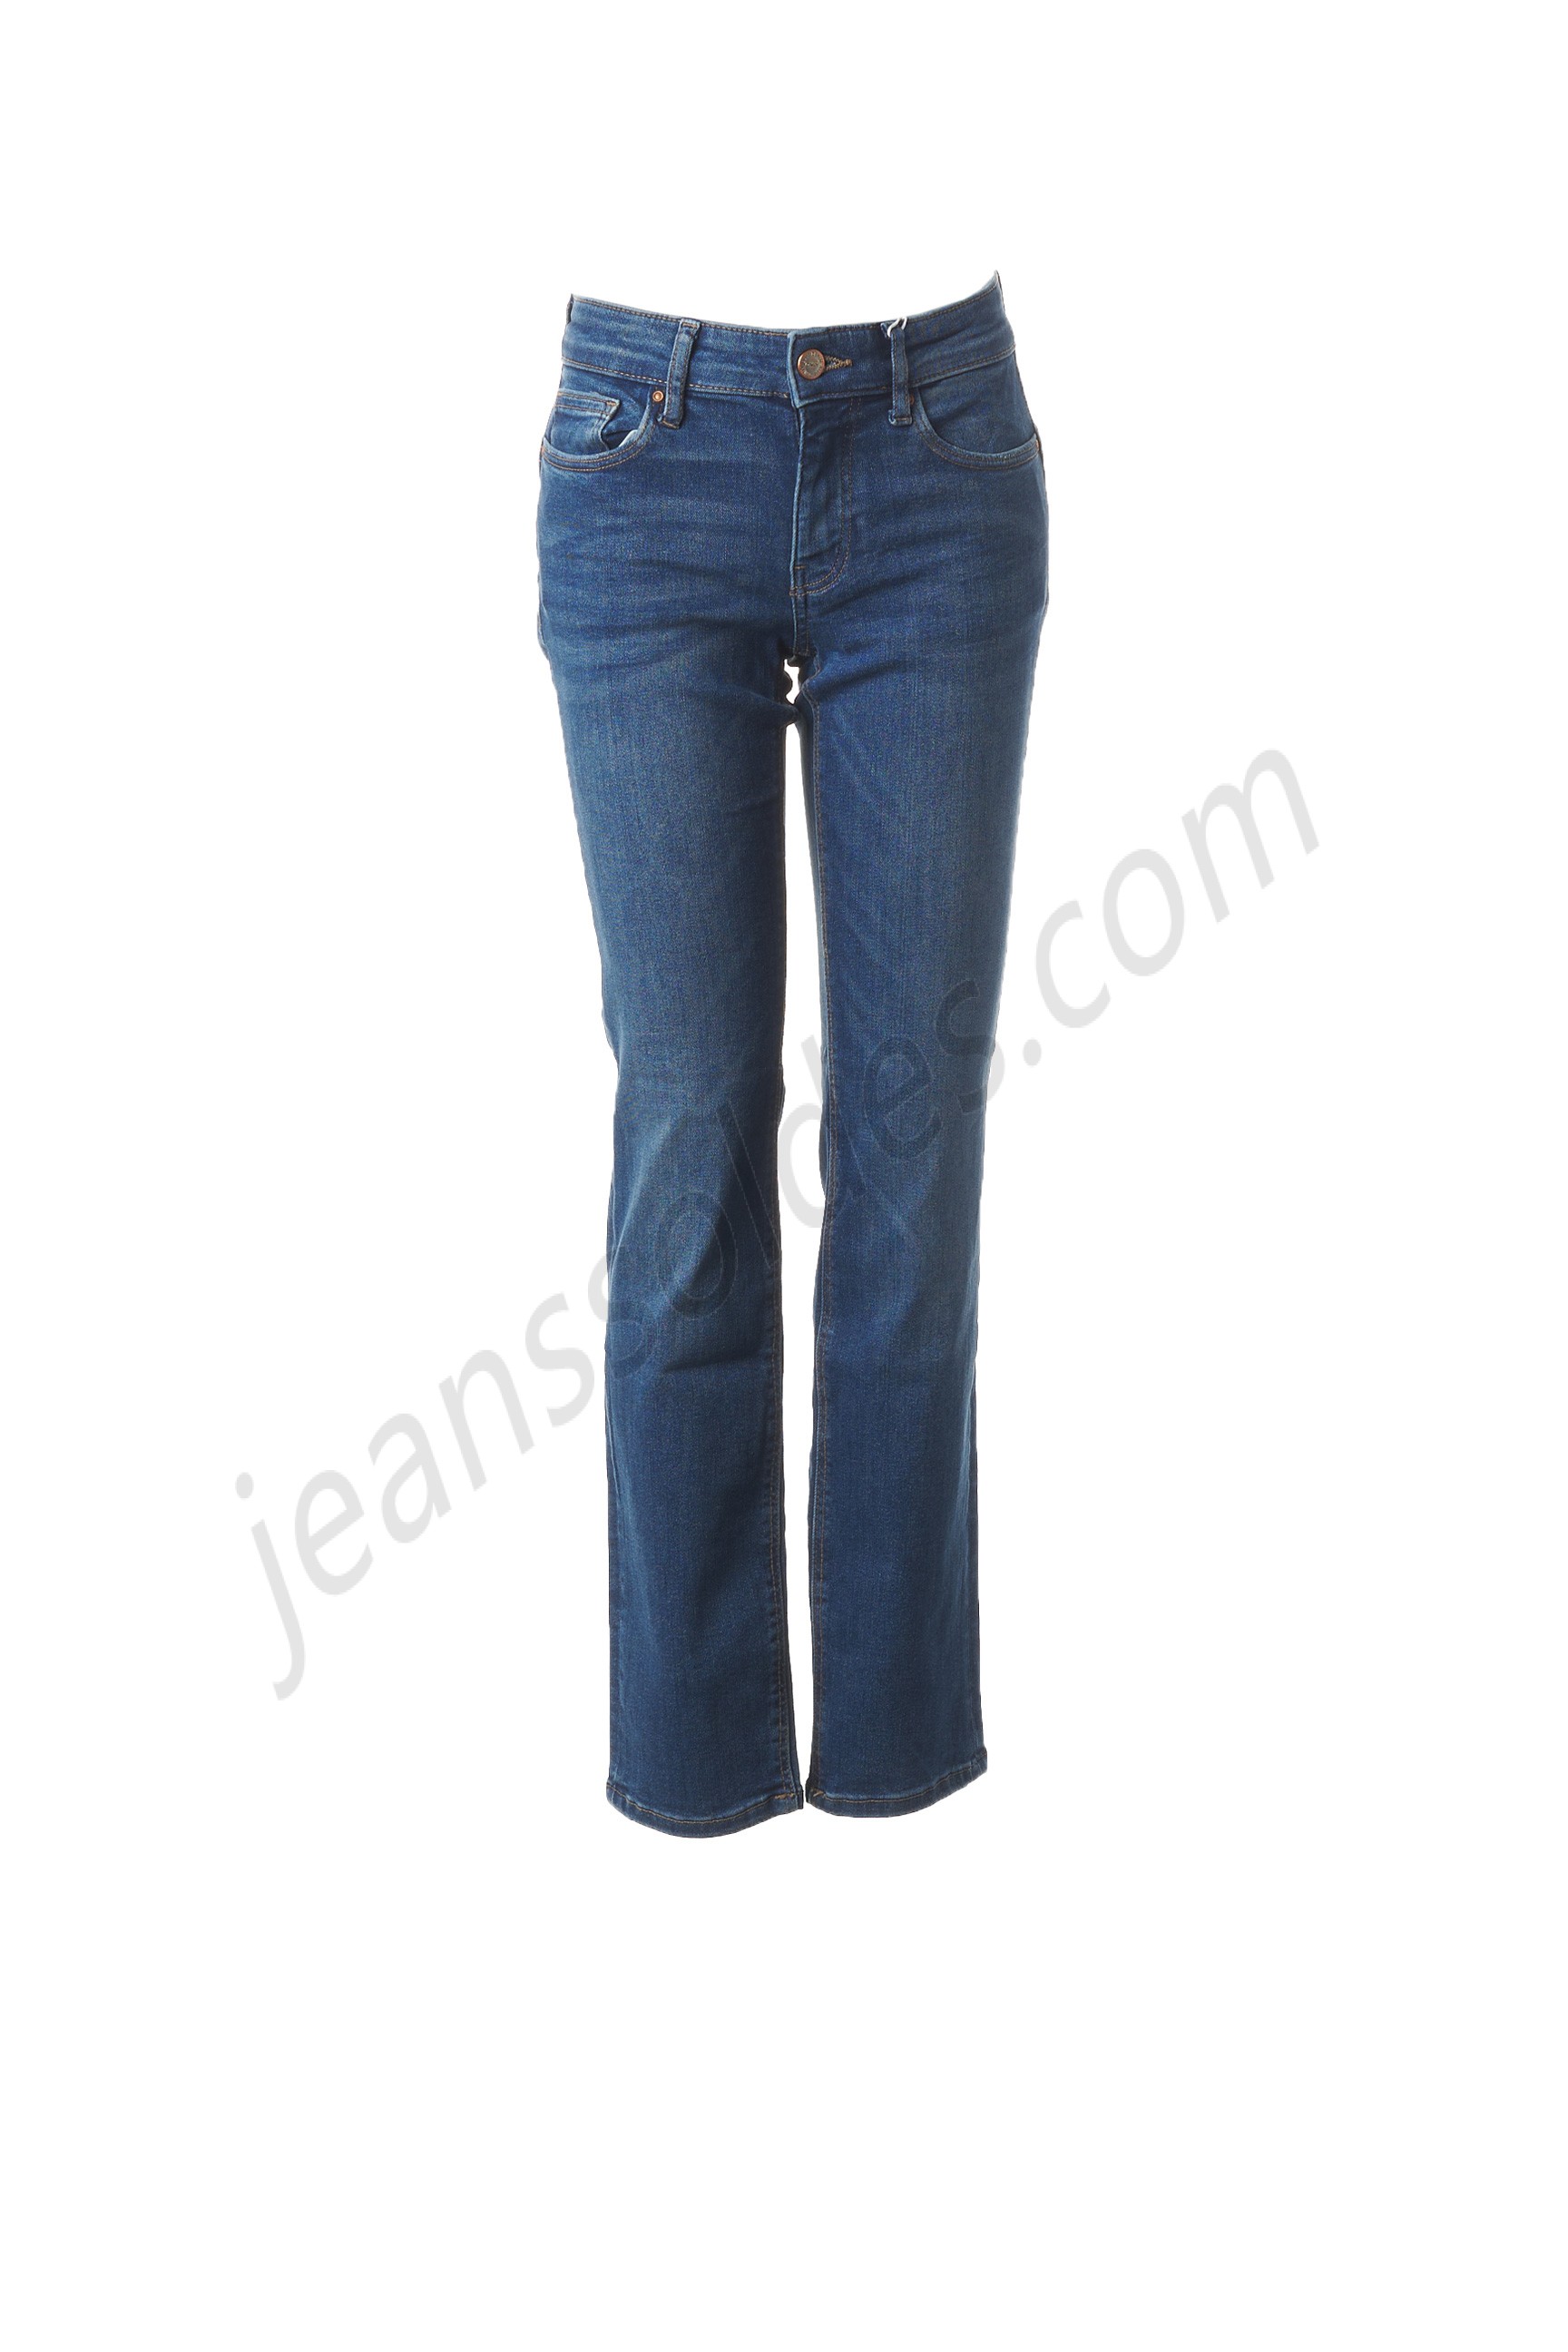 only-Jeans coupe slim prix d’amis - only-Jeans coupe slim prix d’amis